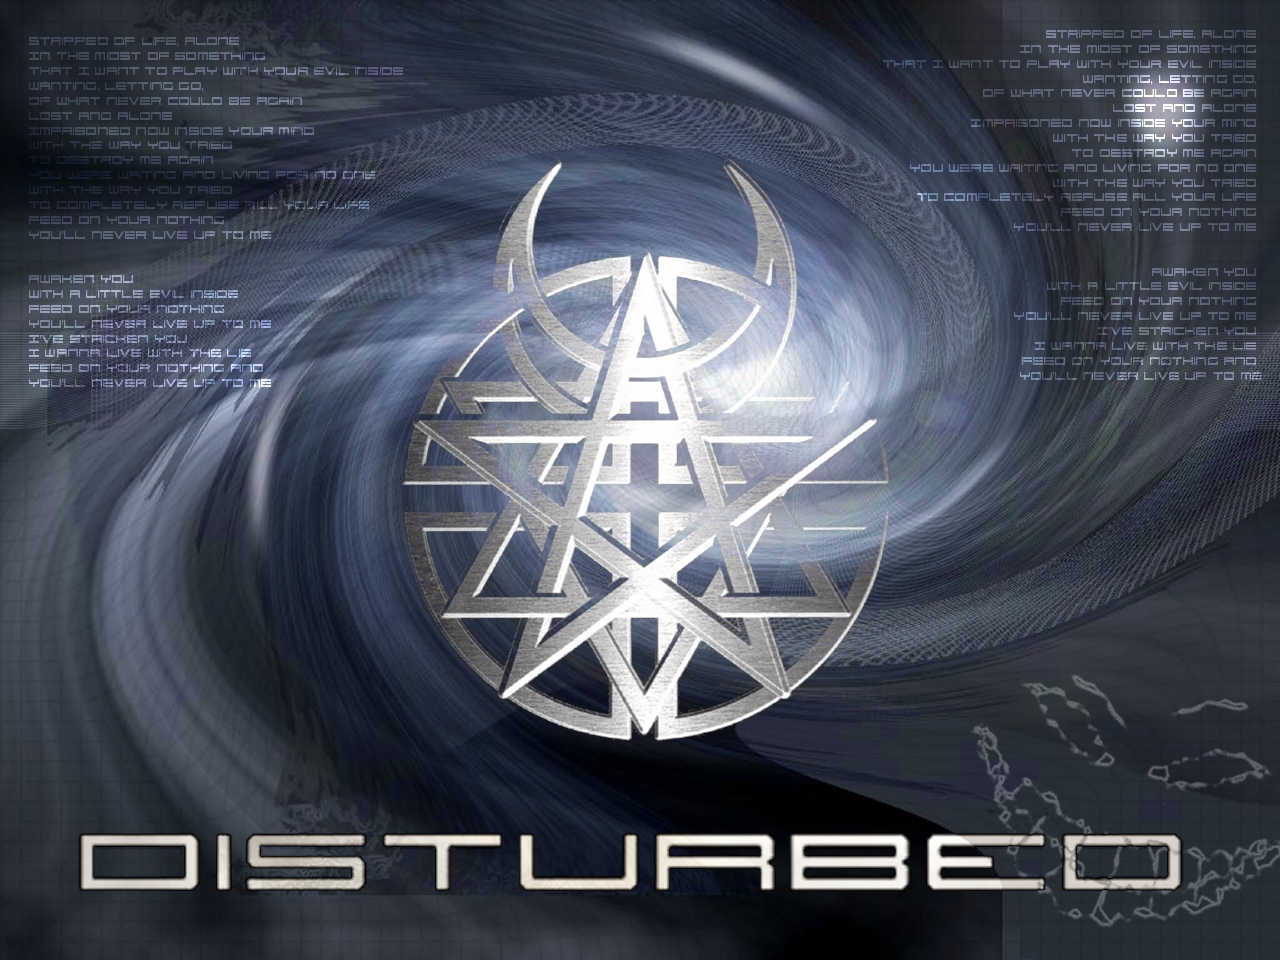 Popular Disturbed (Band) Image for Phone